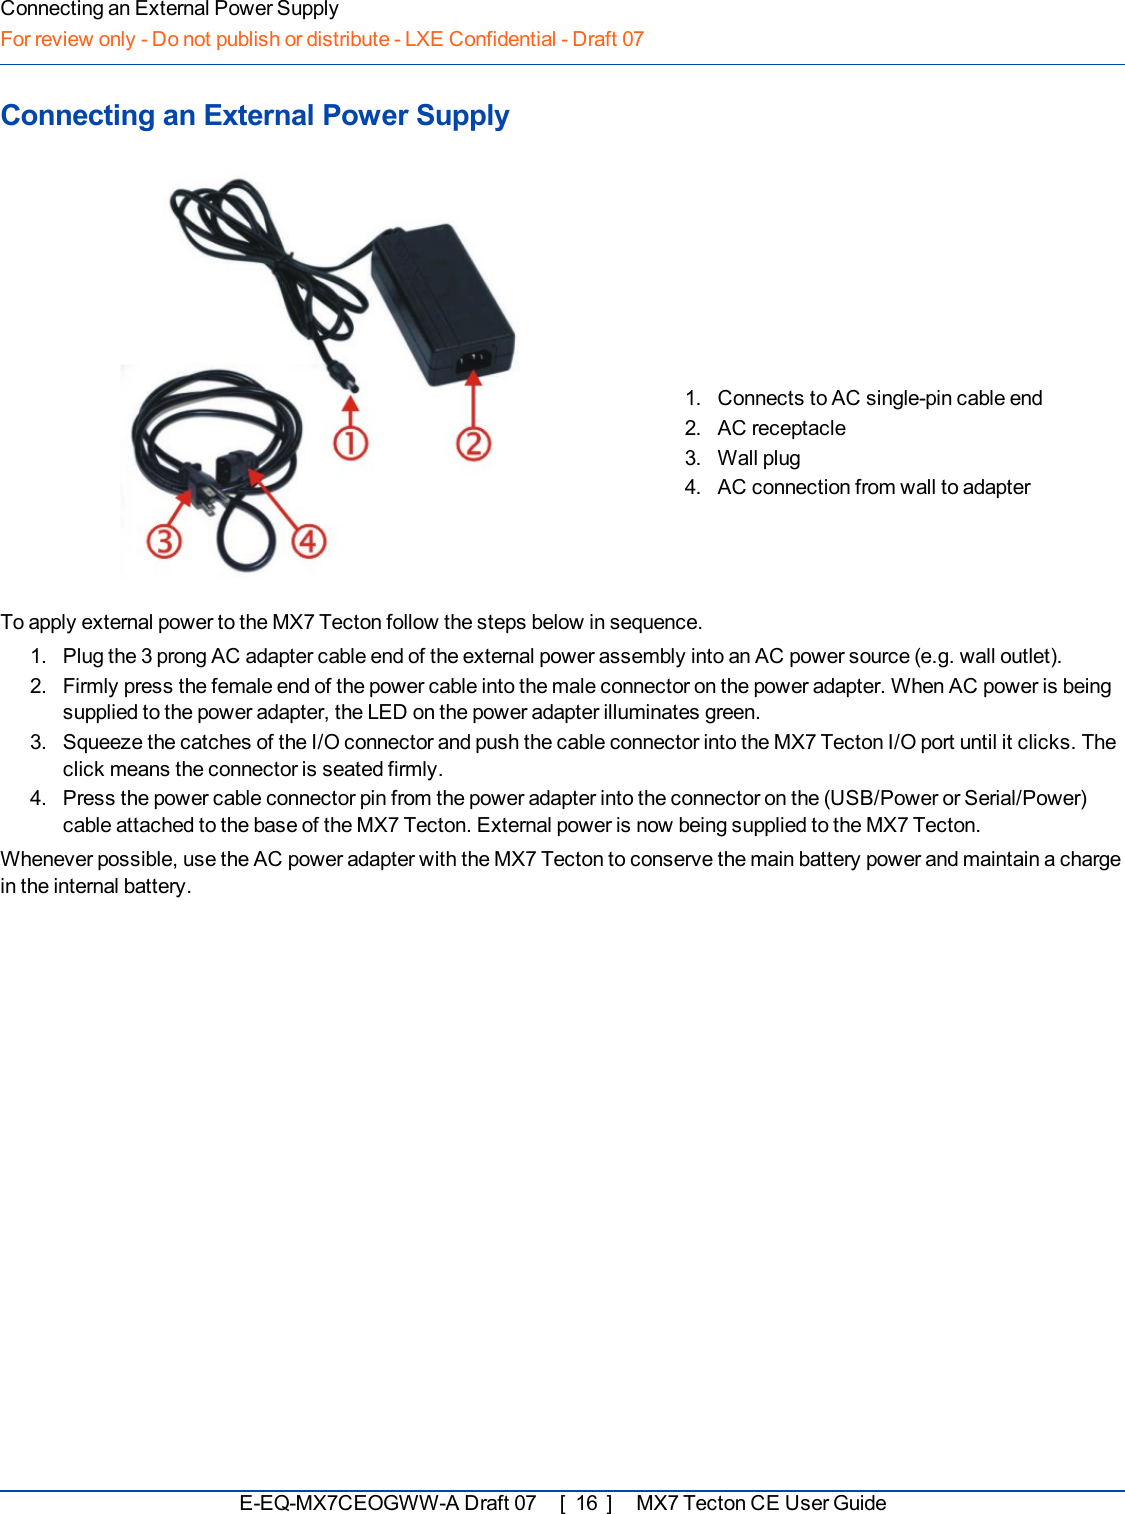 Connecting an External Power SupplyFor review only - Do not publish or distribute - LXE Confidential - Draft 07Connecting an External Power Supply1. Connects to AC single-pin cable end2. AC receptacle3. Wall plug4. AC connection from wall to adapterTo apply external power to the MX7 Tecton follow the steps below in sequence.1. Plug the 3 prong AC adapter cable end of the external power assembly into an AC power source (e.g. wall outlet).2. Firmly press the female end of the power cable into the male connector on the power adapter. When AC power is beingsupplied to the power adapter, the LED on the power adapter illuminates green.3. Squeeze the catches of the I/O connector and push the cable connector into the MX7 Tecton I/O port until it clicks. Theclick means the connector is seated firmly.4. Press the power cable connector pin from the power adapter into the connector on the (USB/Power or Serial/Power)cable attached to the base of the MX7 Tecton. External power is now being supplied to the MX7 Tecton.Whenever possible, use the AC power adapter with the MX7 Tecton to conserve the main battery power and maintain a chargein the internal battery.E-EQ-MX7CEOGWW-ADraft 07 [ 16 ] MX7 Tecton CE User Guide